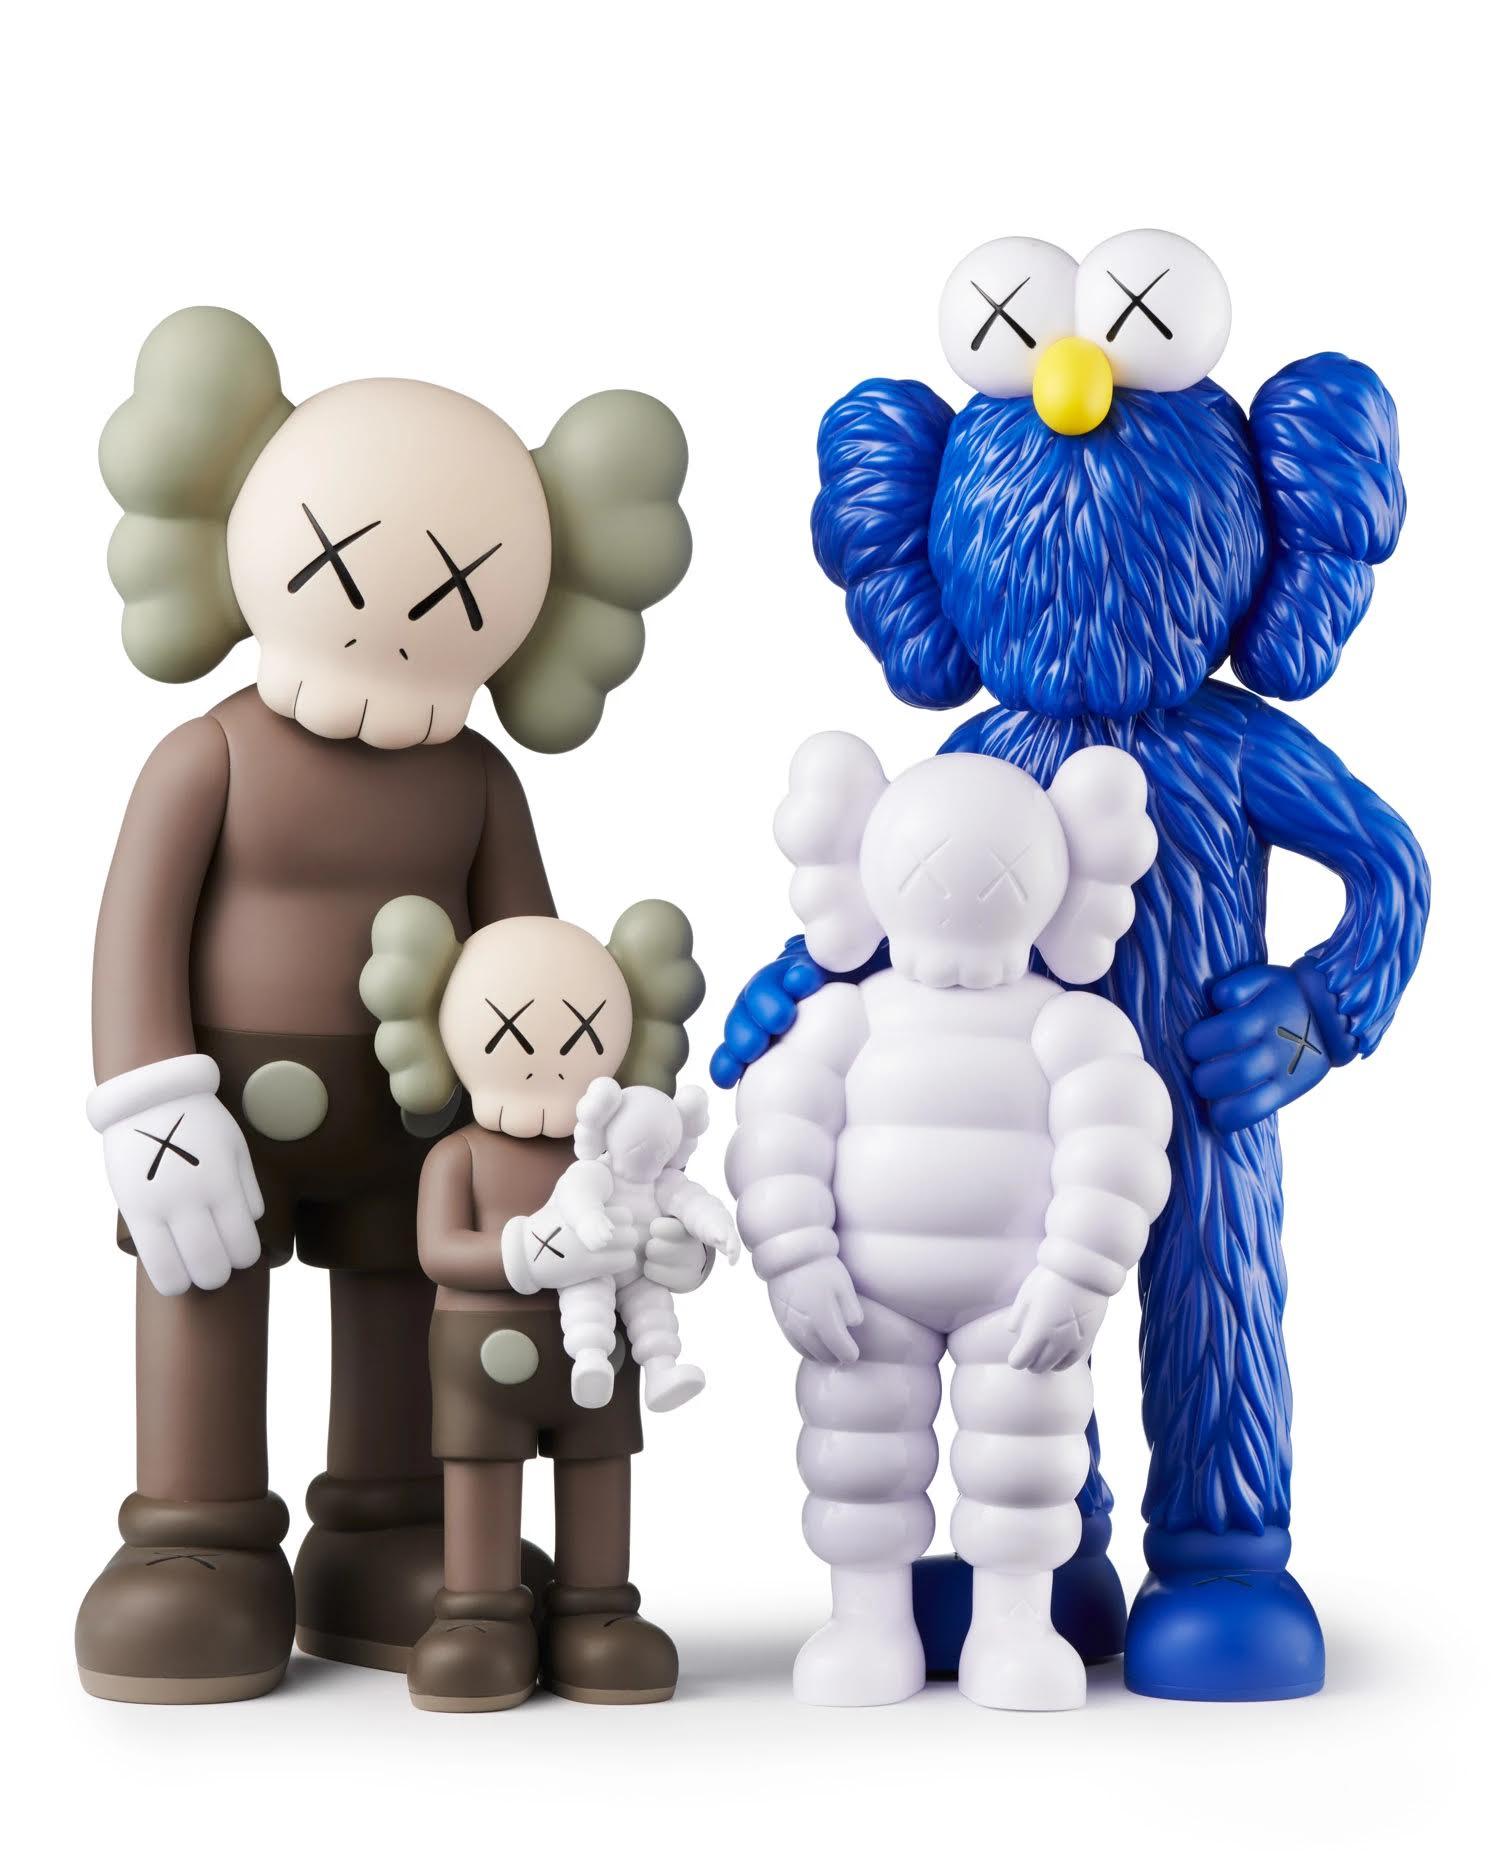 KAWS FAMILY 2021: complete set of 3 works:
These well-received, highly collectible KAWS Companion sets were published on the occasion of KAWS’ first large scale Japanese museum exhibition, KAWS: TOKYO FIRST at The Mori Art Museum Japan. In FAMILY,